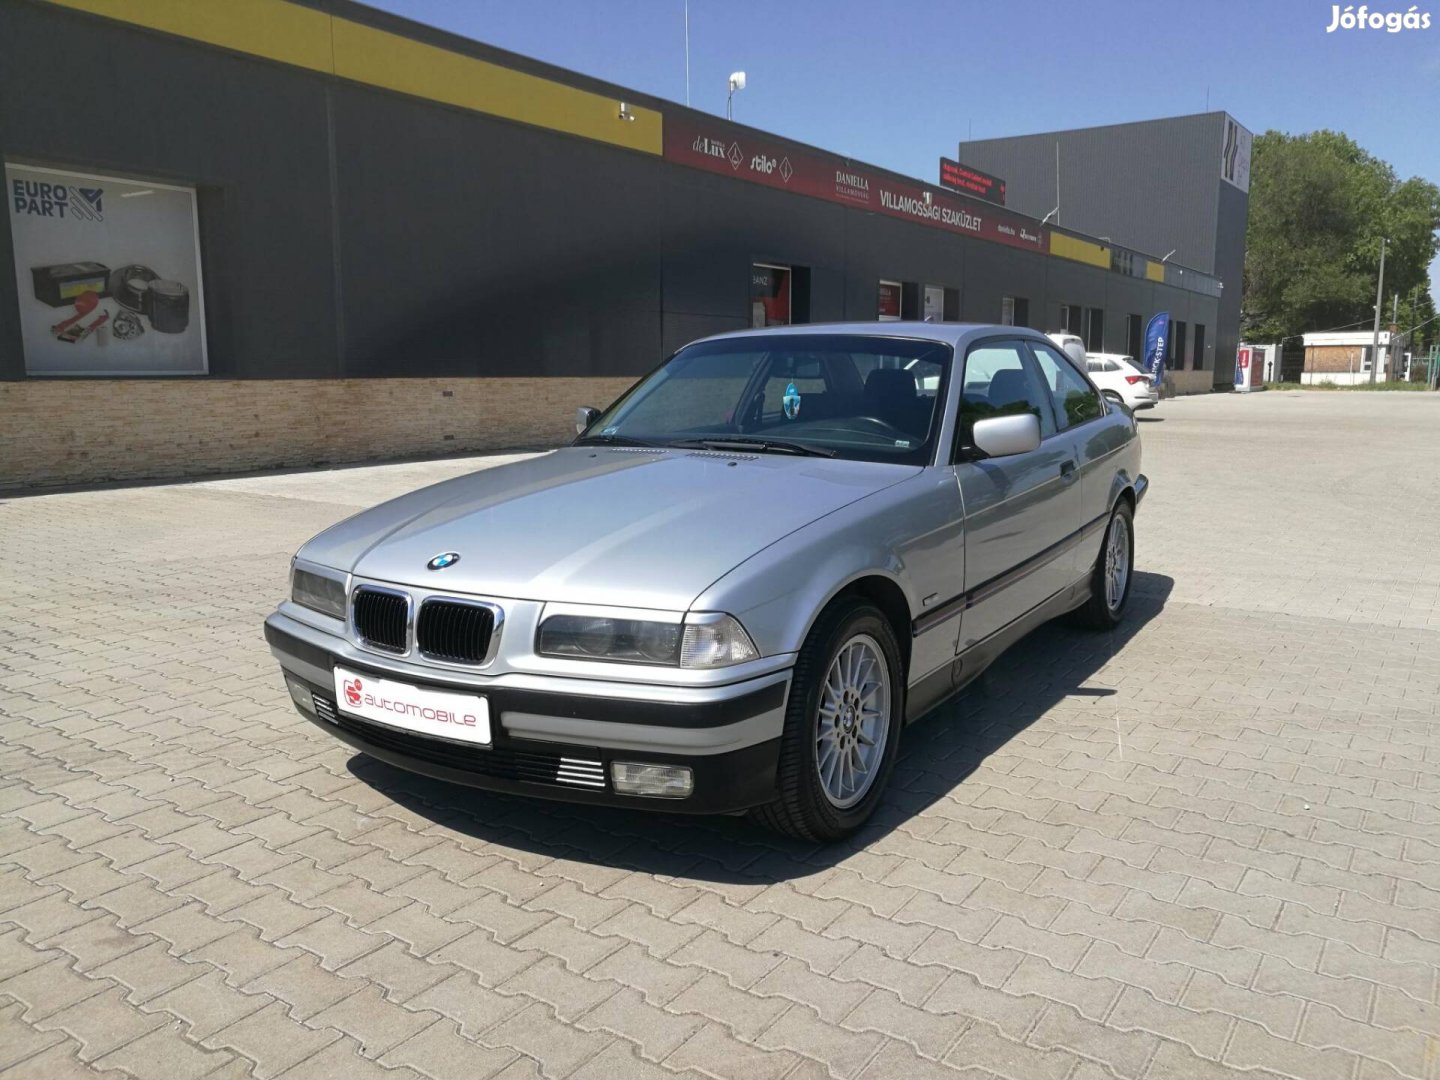 BMW 318is......